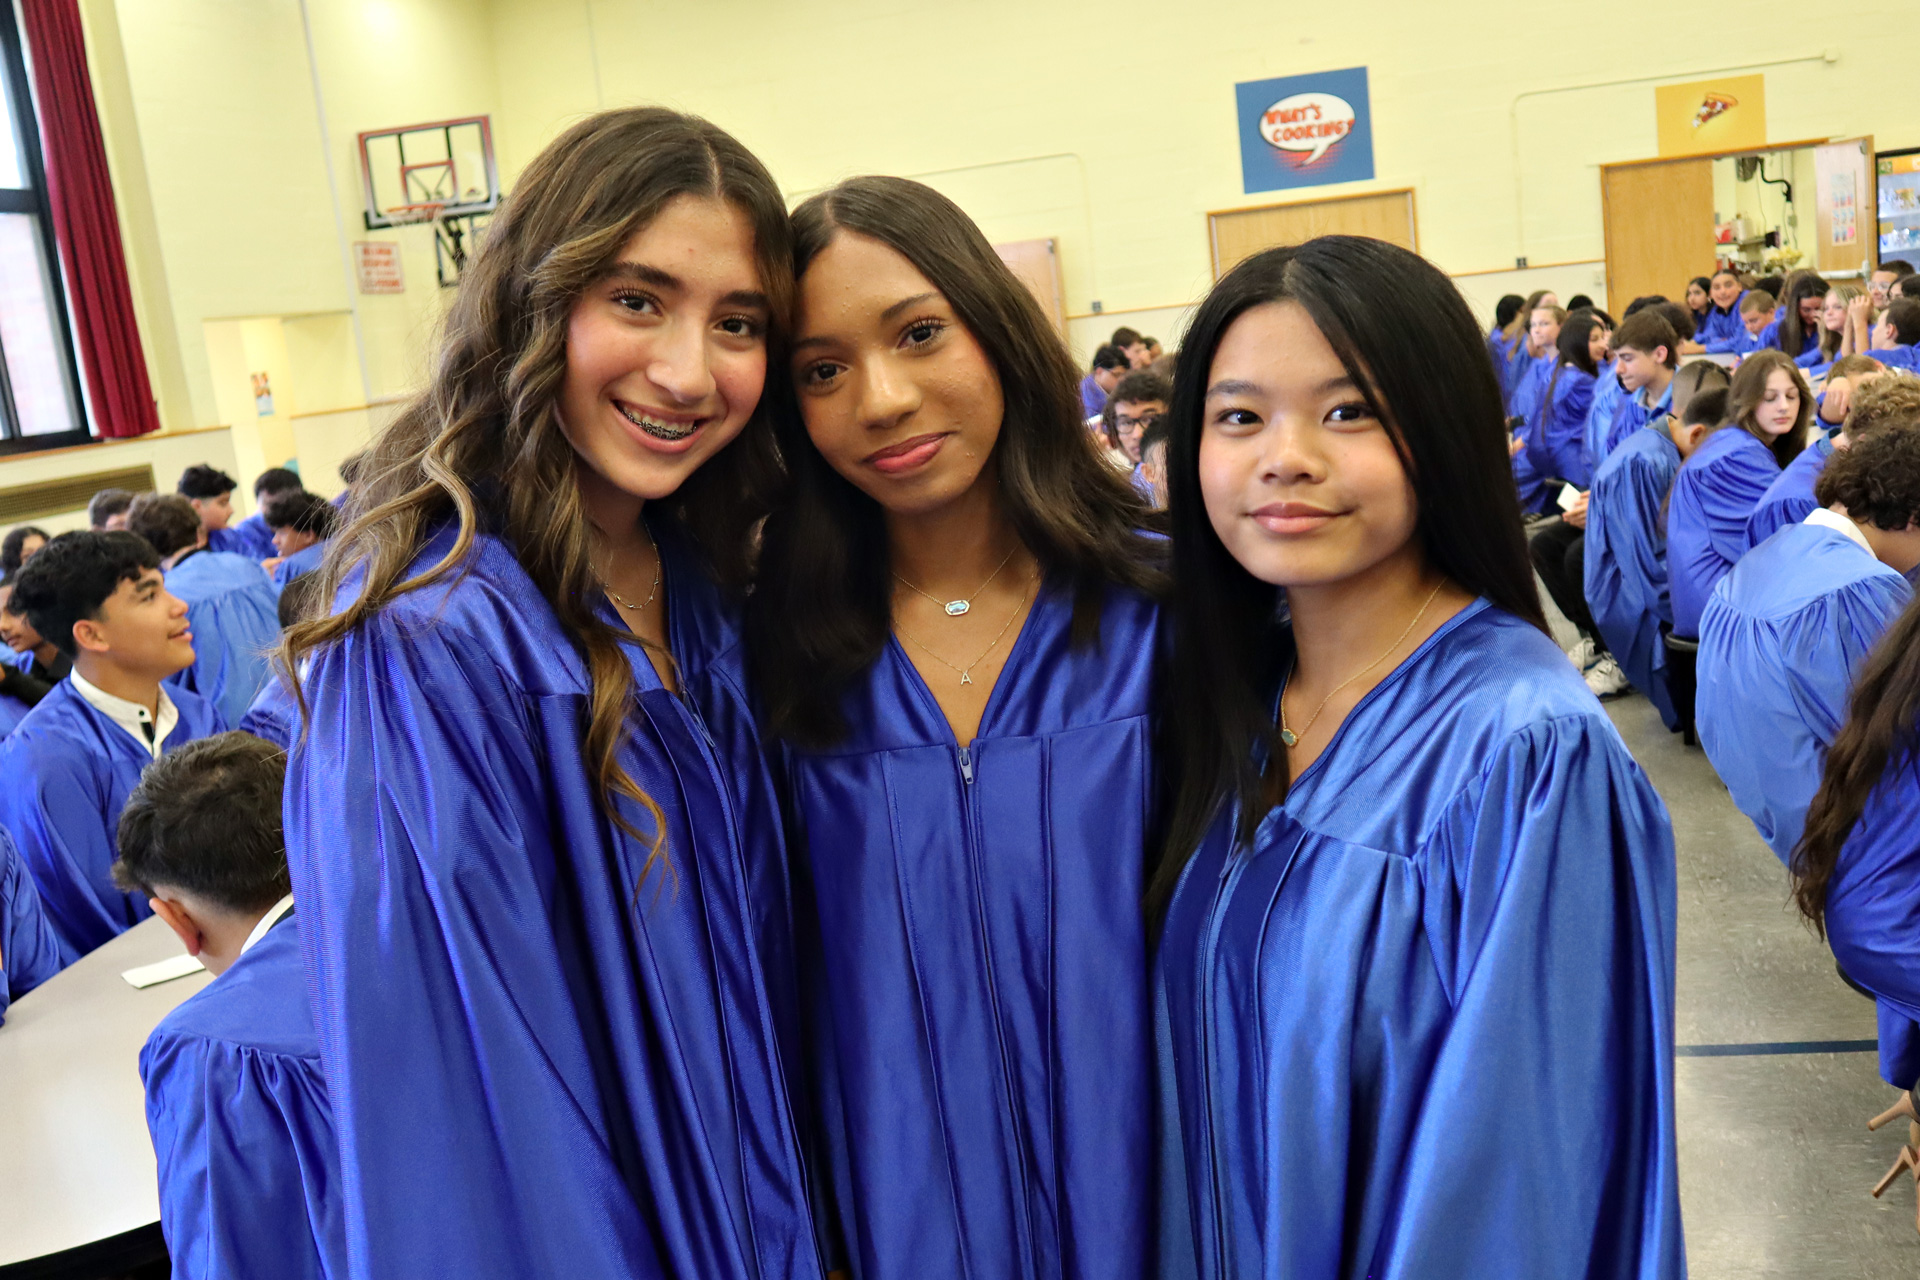 Friends enjoyed one last celebration as middle schoolers prior to the ceremony.